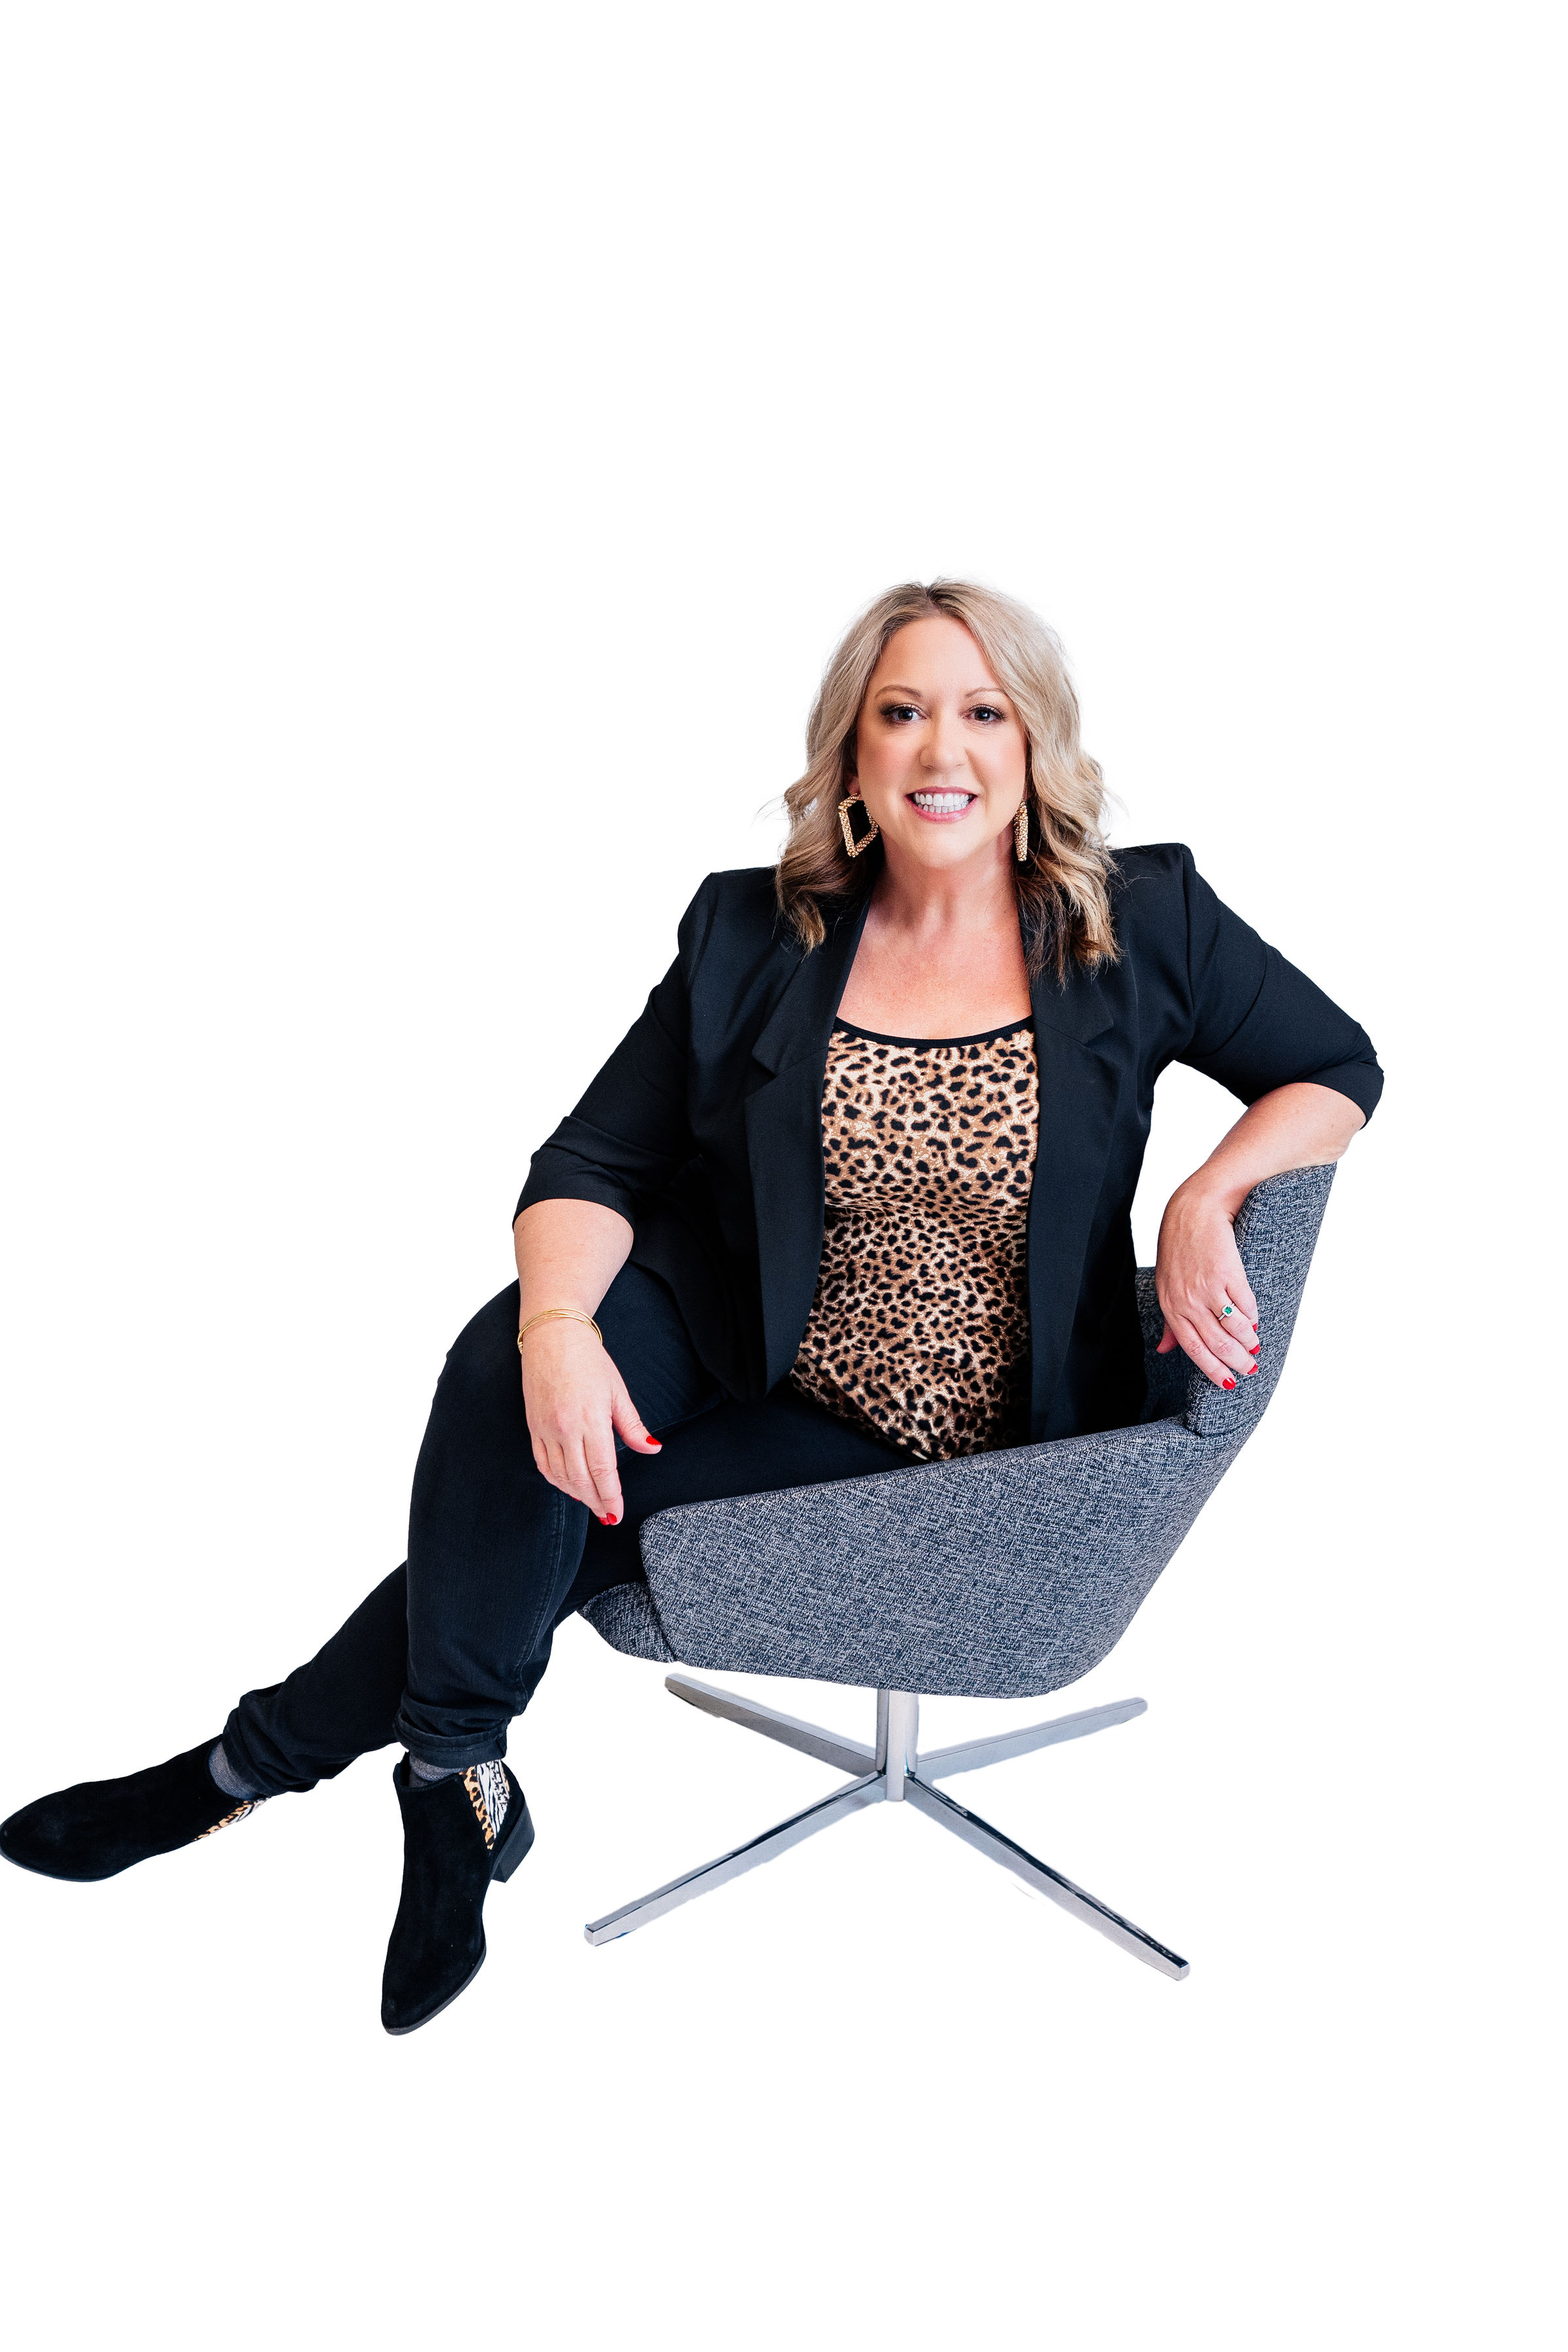 Q102 radio personality Jennifer Fritsch, dressed up and seated in a chair, for her blogs with Healthspirations.